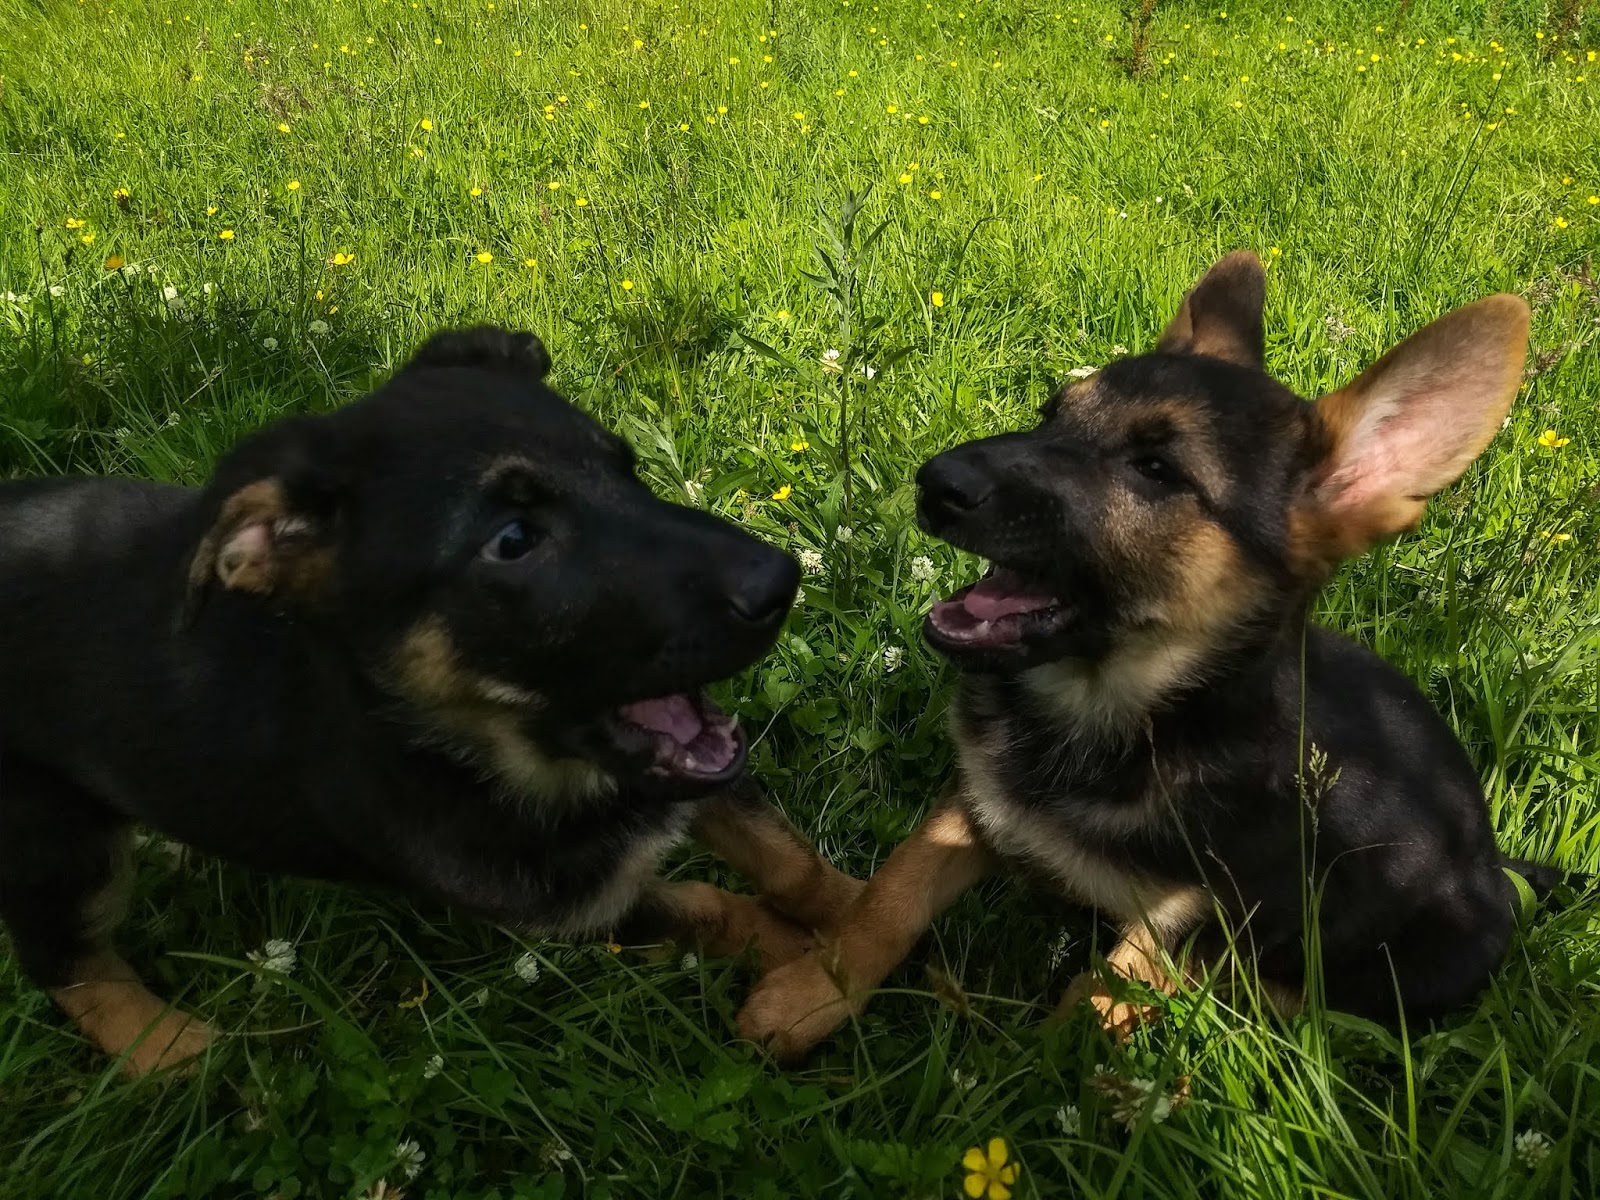 Two month old German Shepherd sister having a laugh in the grass.